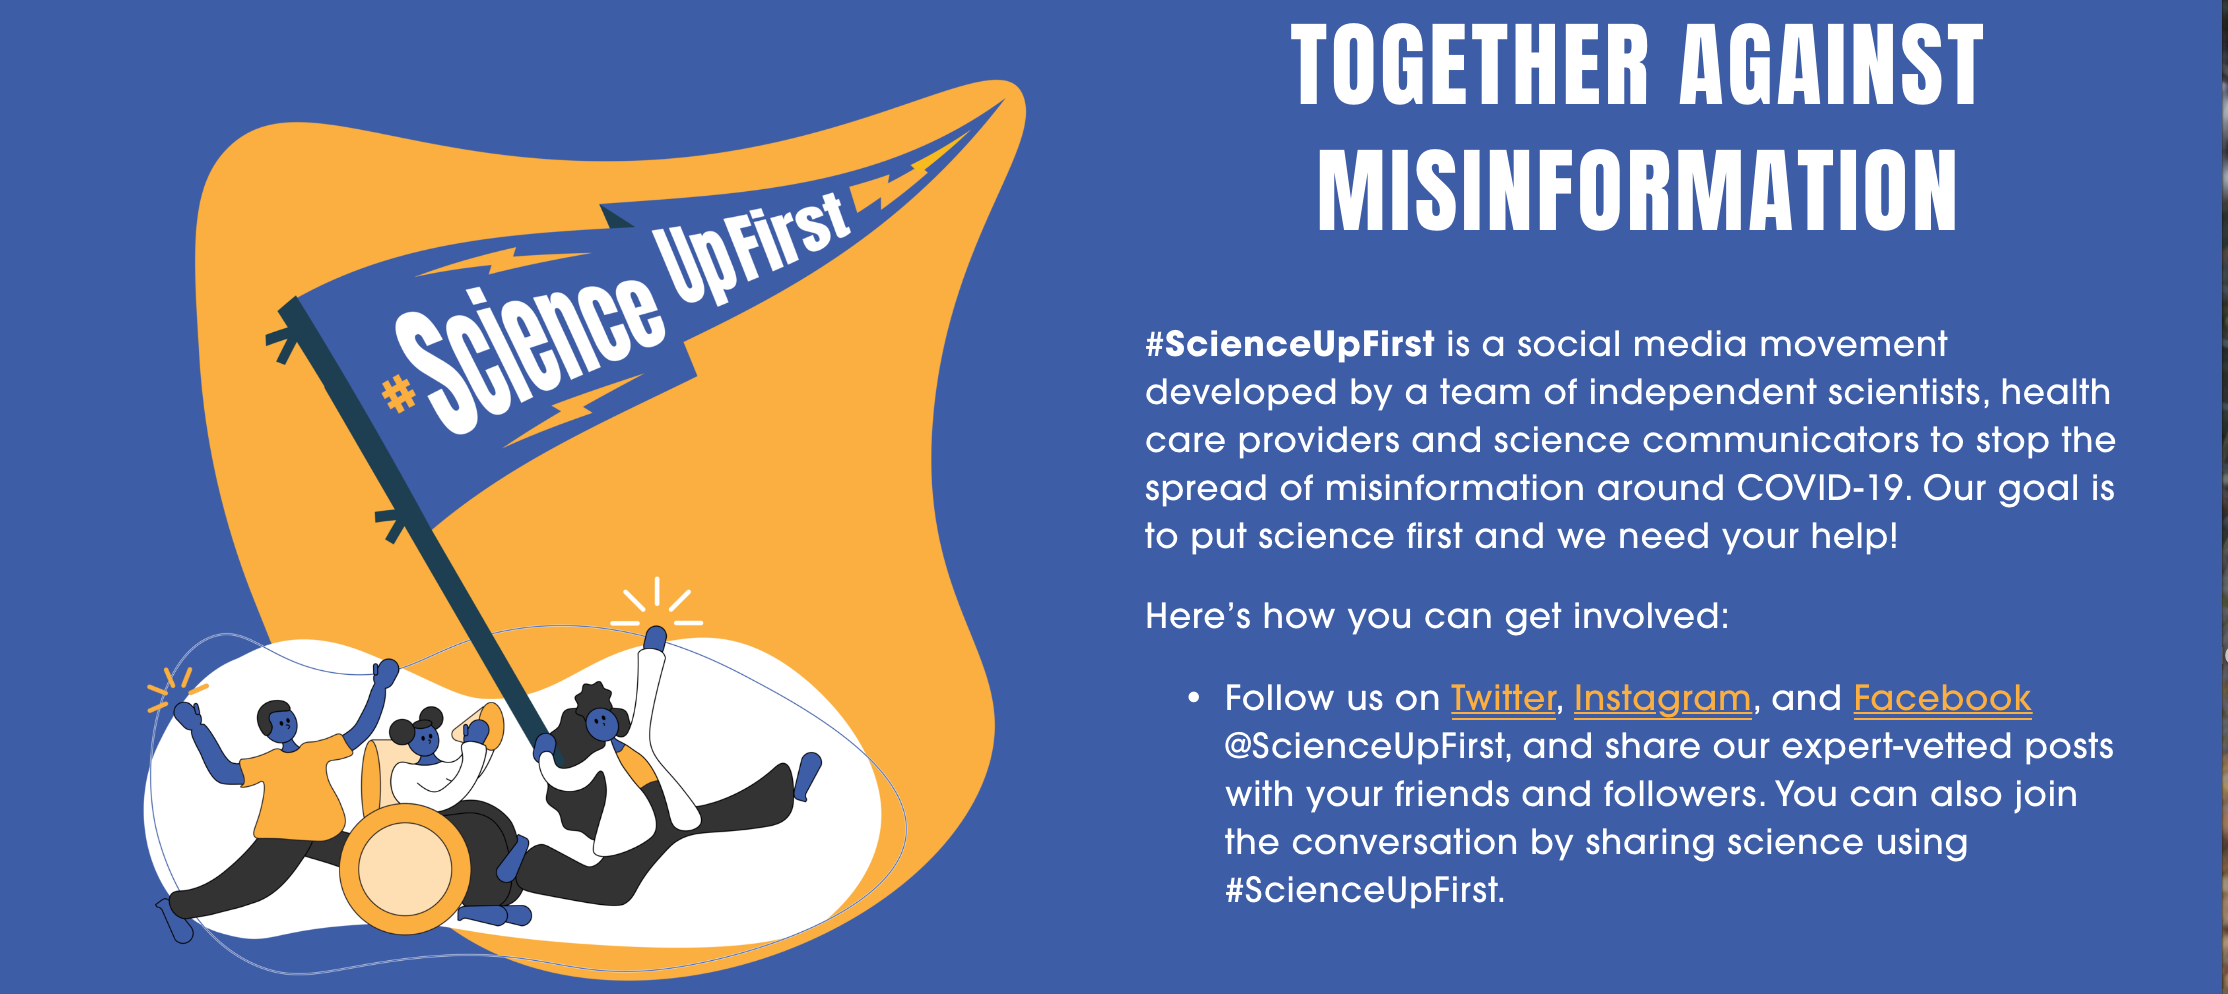 Together Against Misinformation: ScienceUpFirst is a social media movement developed by a team of independent scientists, health-care providers and science communicators to stop the spread of misinformation around COVID-19.